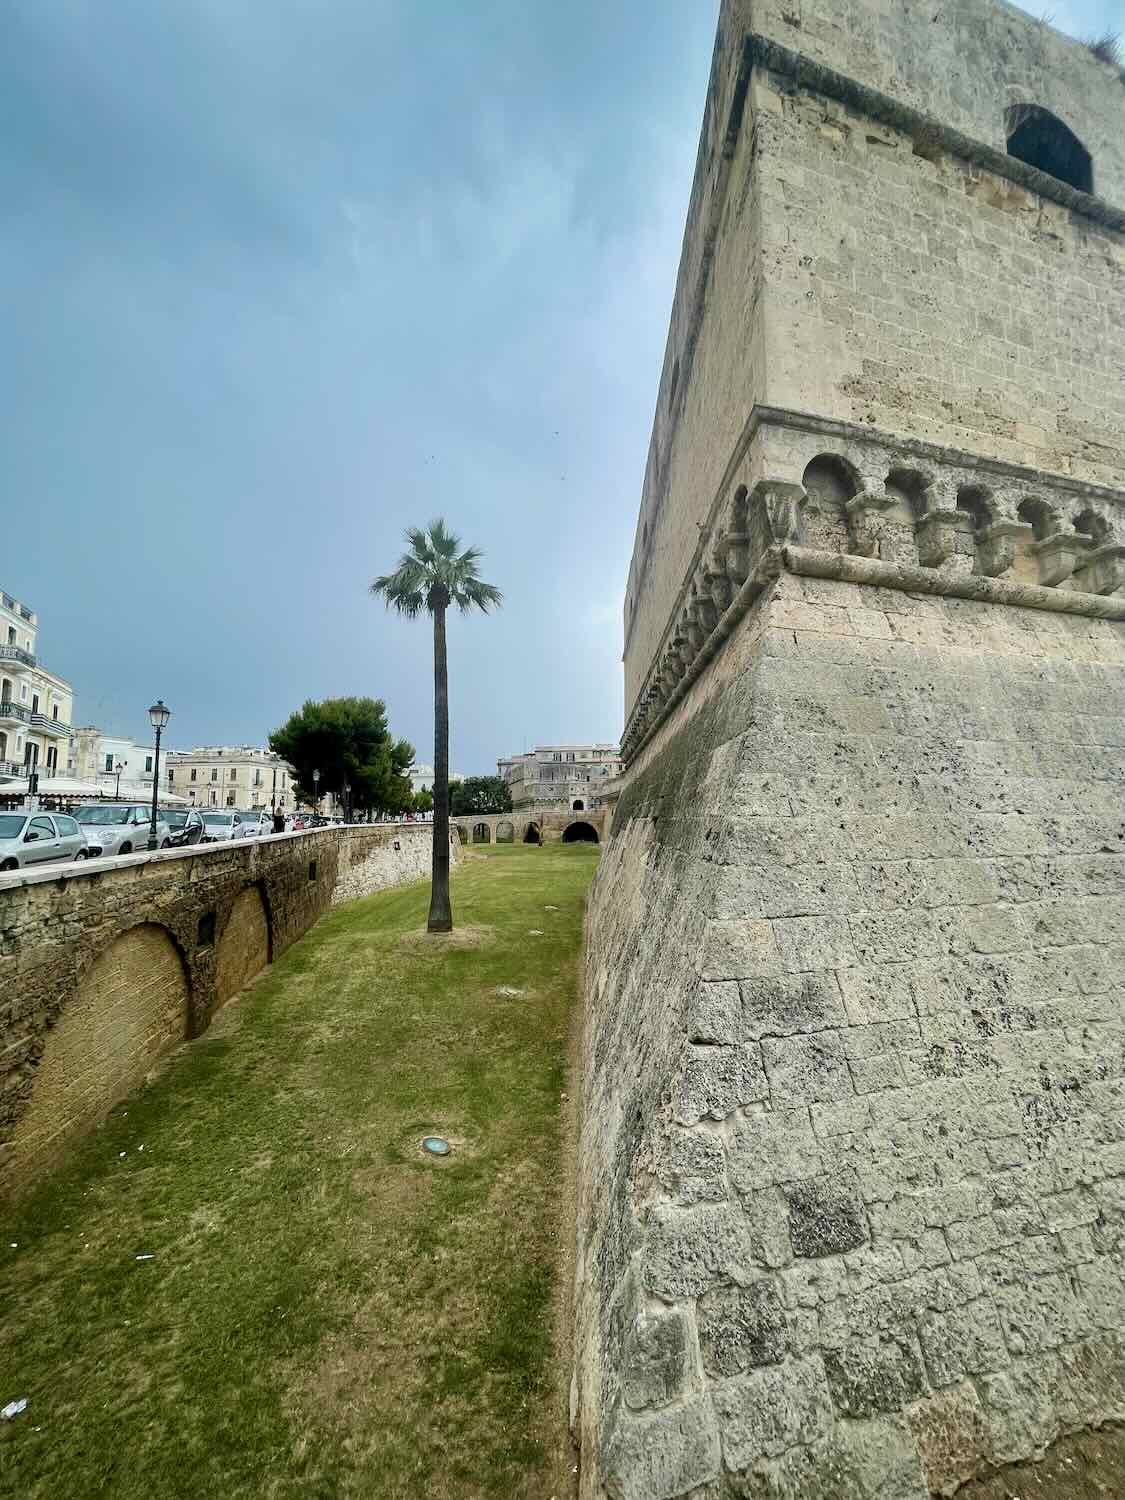 A side view of Bari Castle, showcasing its large stone walls and a small grassy moat. A lone palm tree stands beside the castle, and the sky is overcast.